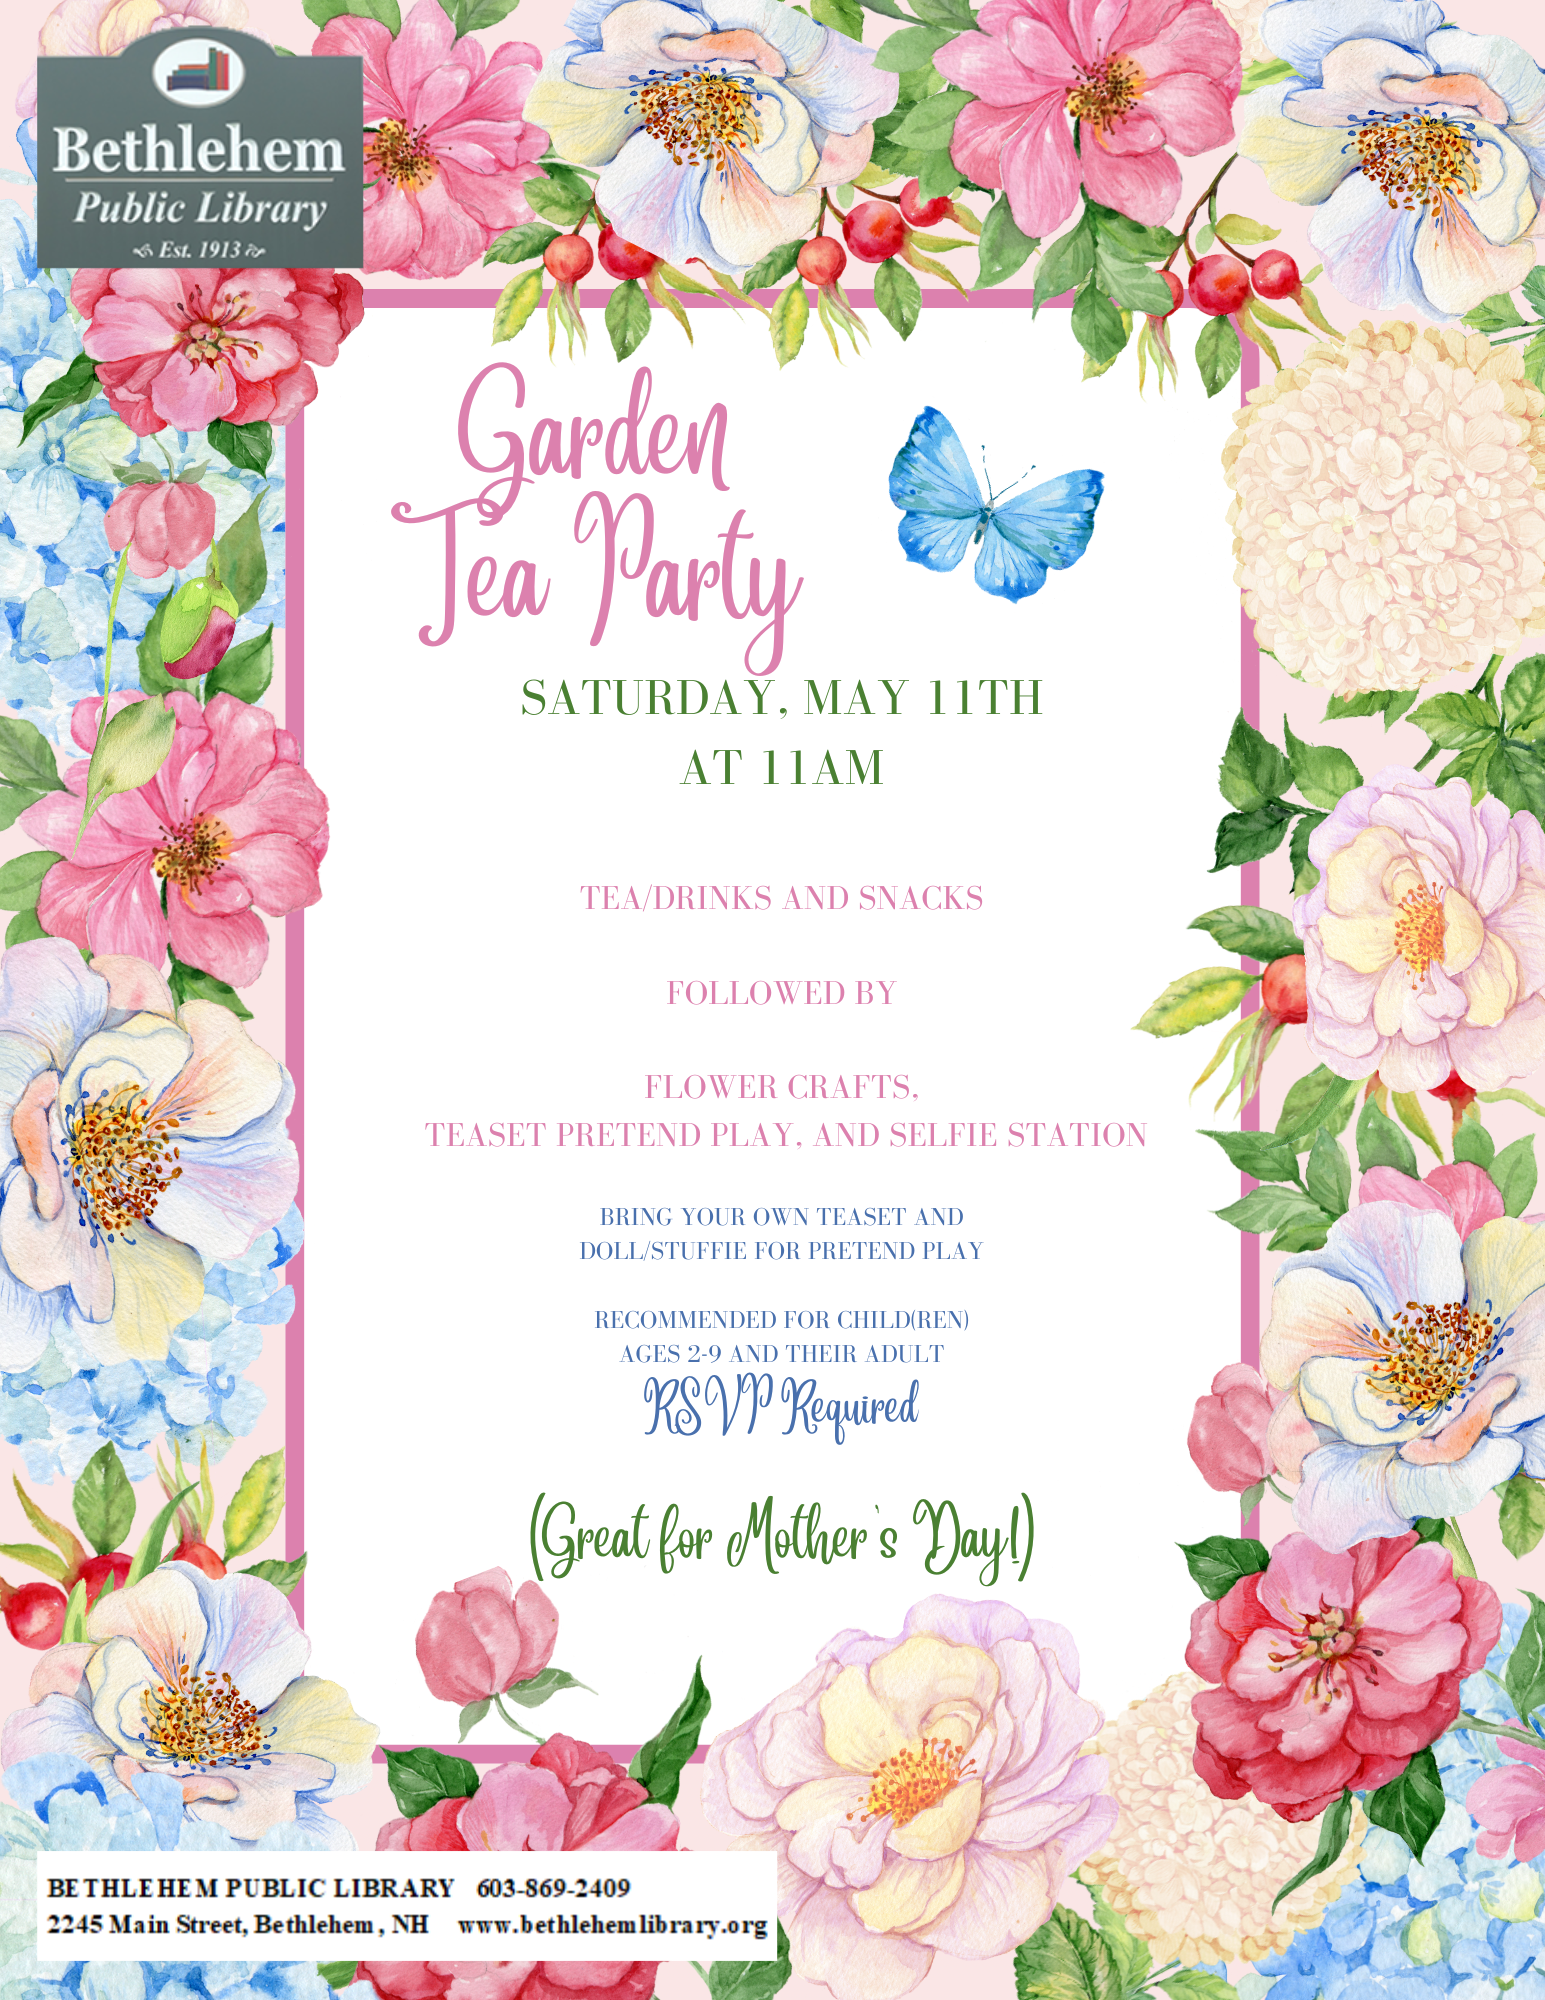 SATURDAY, MAY 11TH AT 11AM TEA/DRINKS AND SNACKS FOLLOWED BY FLOWER CRAFTS, TEASET PRETEND PLAY, AND SELFIE STATION BRING YOUR OWN TEASET AND DOLL/STUFFIE FOR PRETEND PLAY RECOMMENDED FOR CHILD(REN) AGES 2-9 AND THEIR ADULT Garden Tea Party RSVP Required (Great for Mother's Day!)